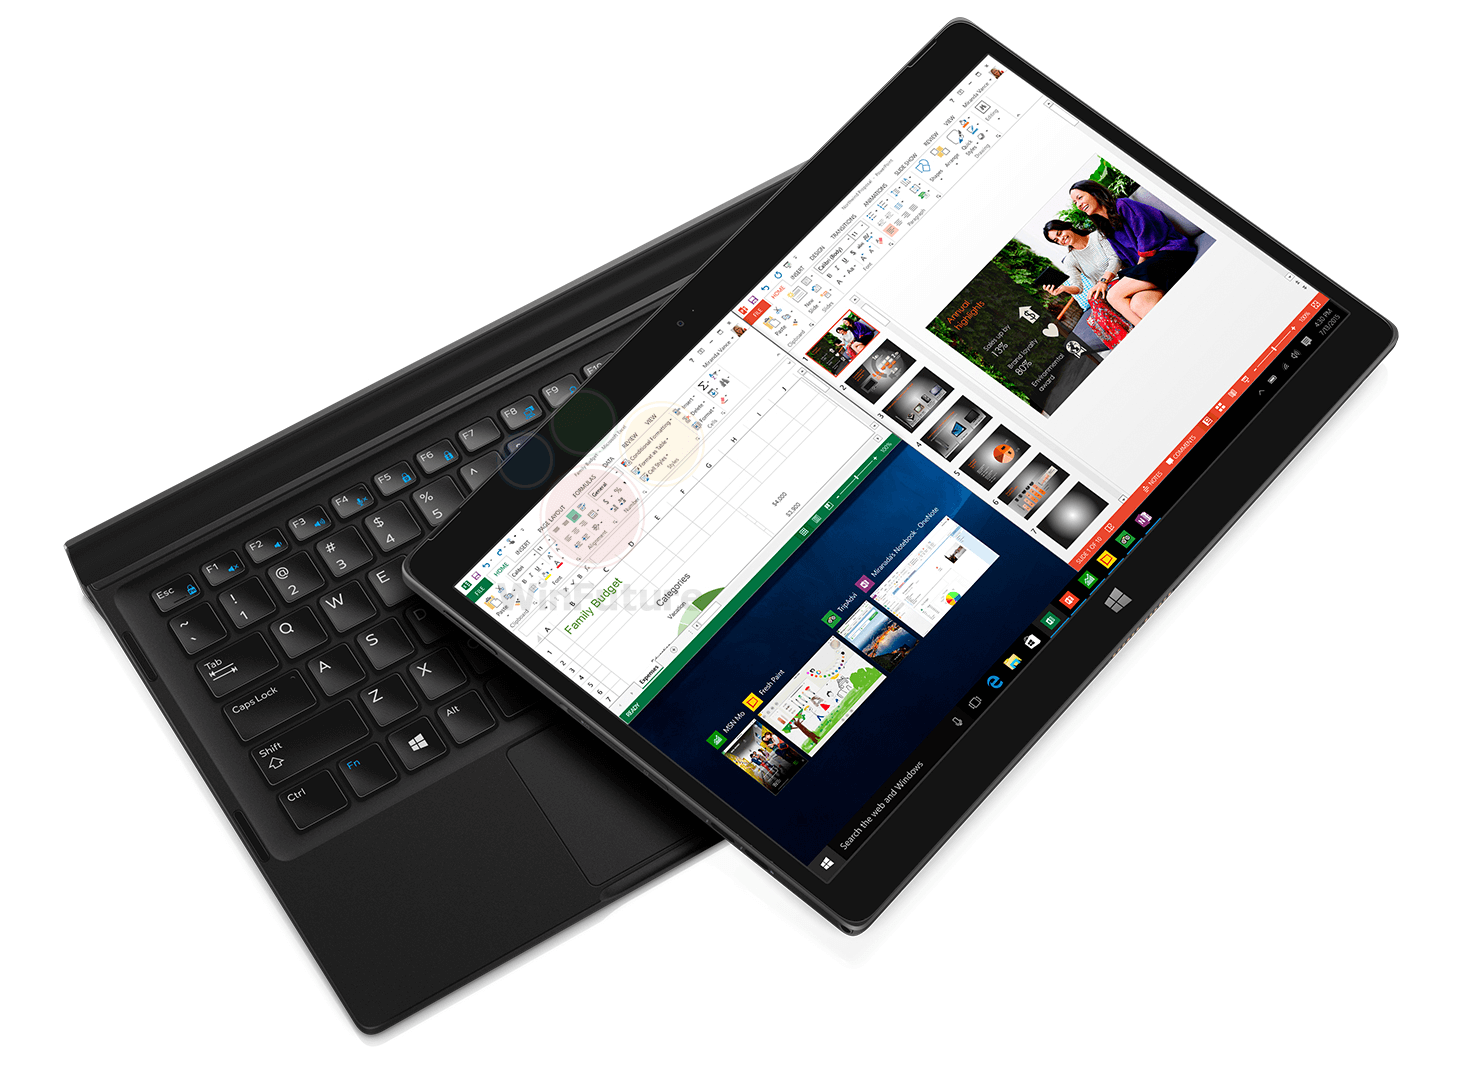 The New Dell XPS 12